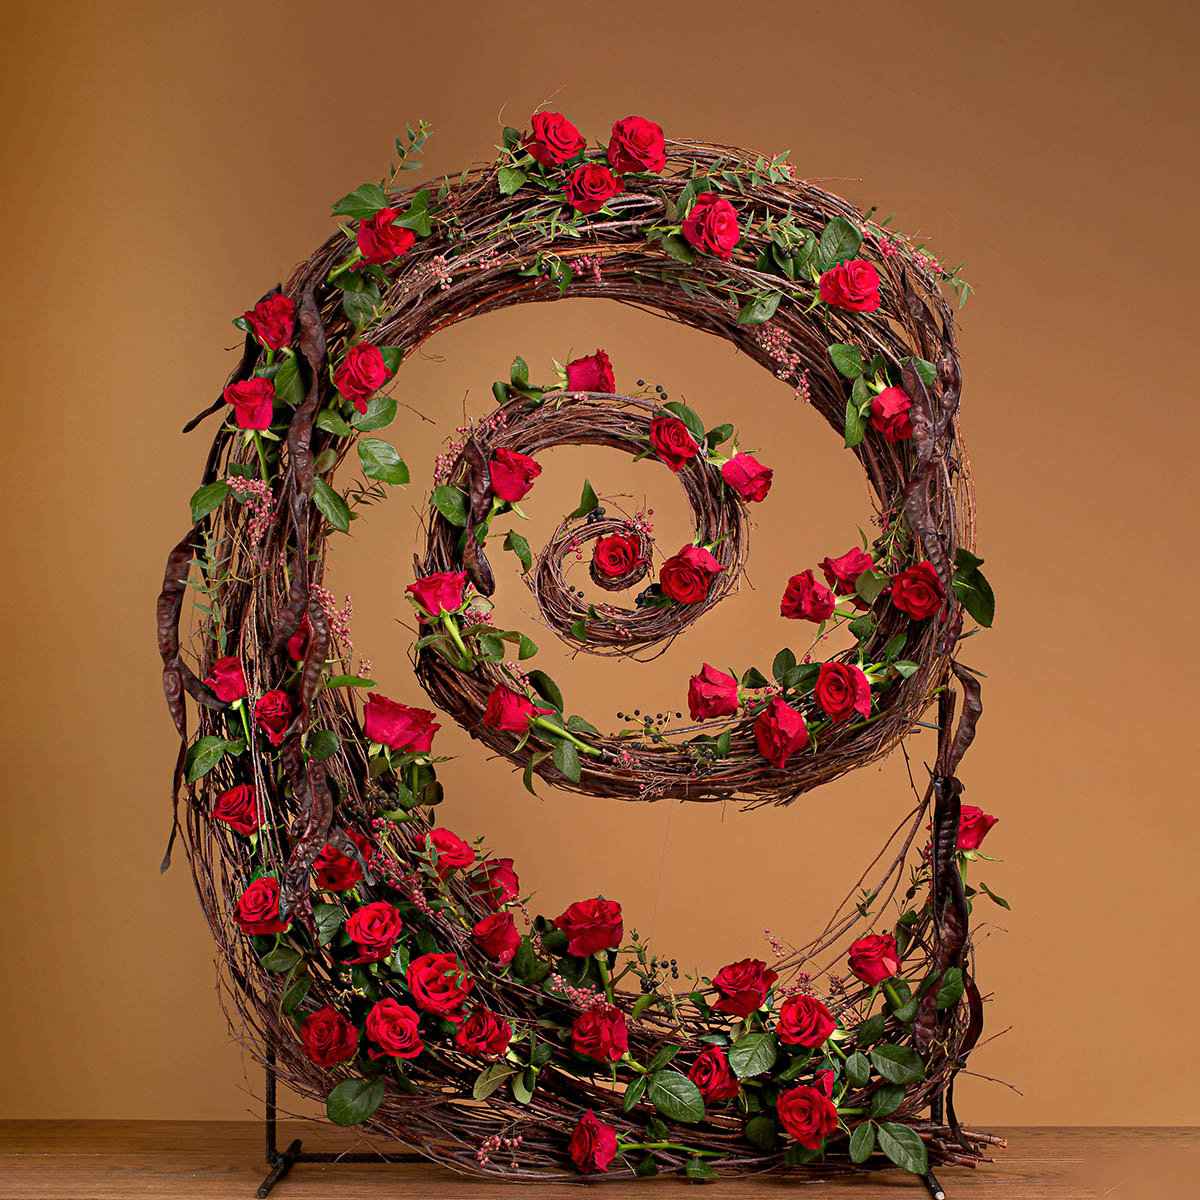 very-impressed-by-the-unique-red-tacazzi-roses-featured